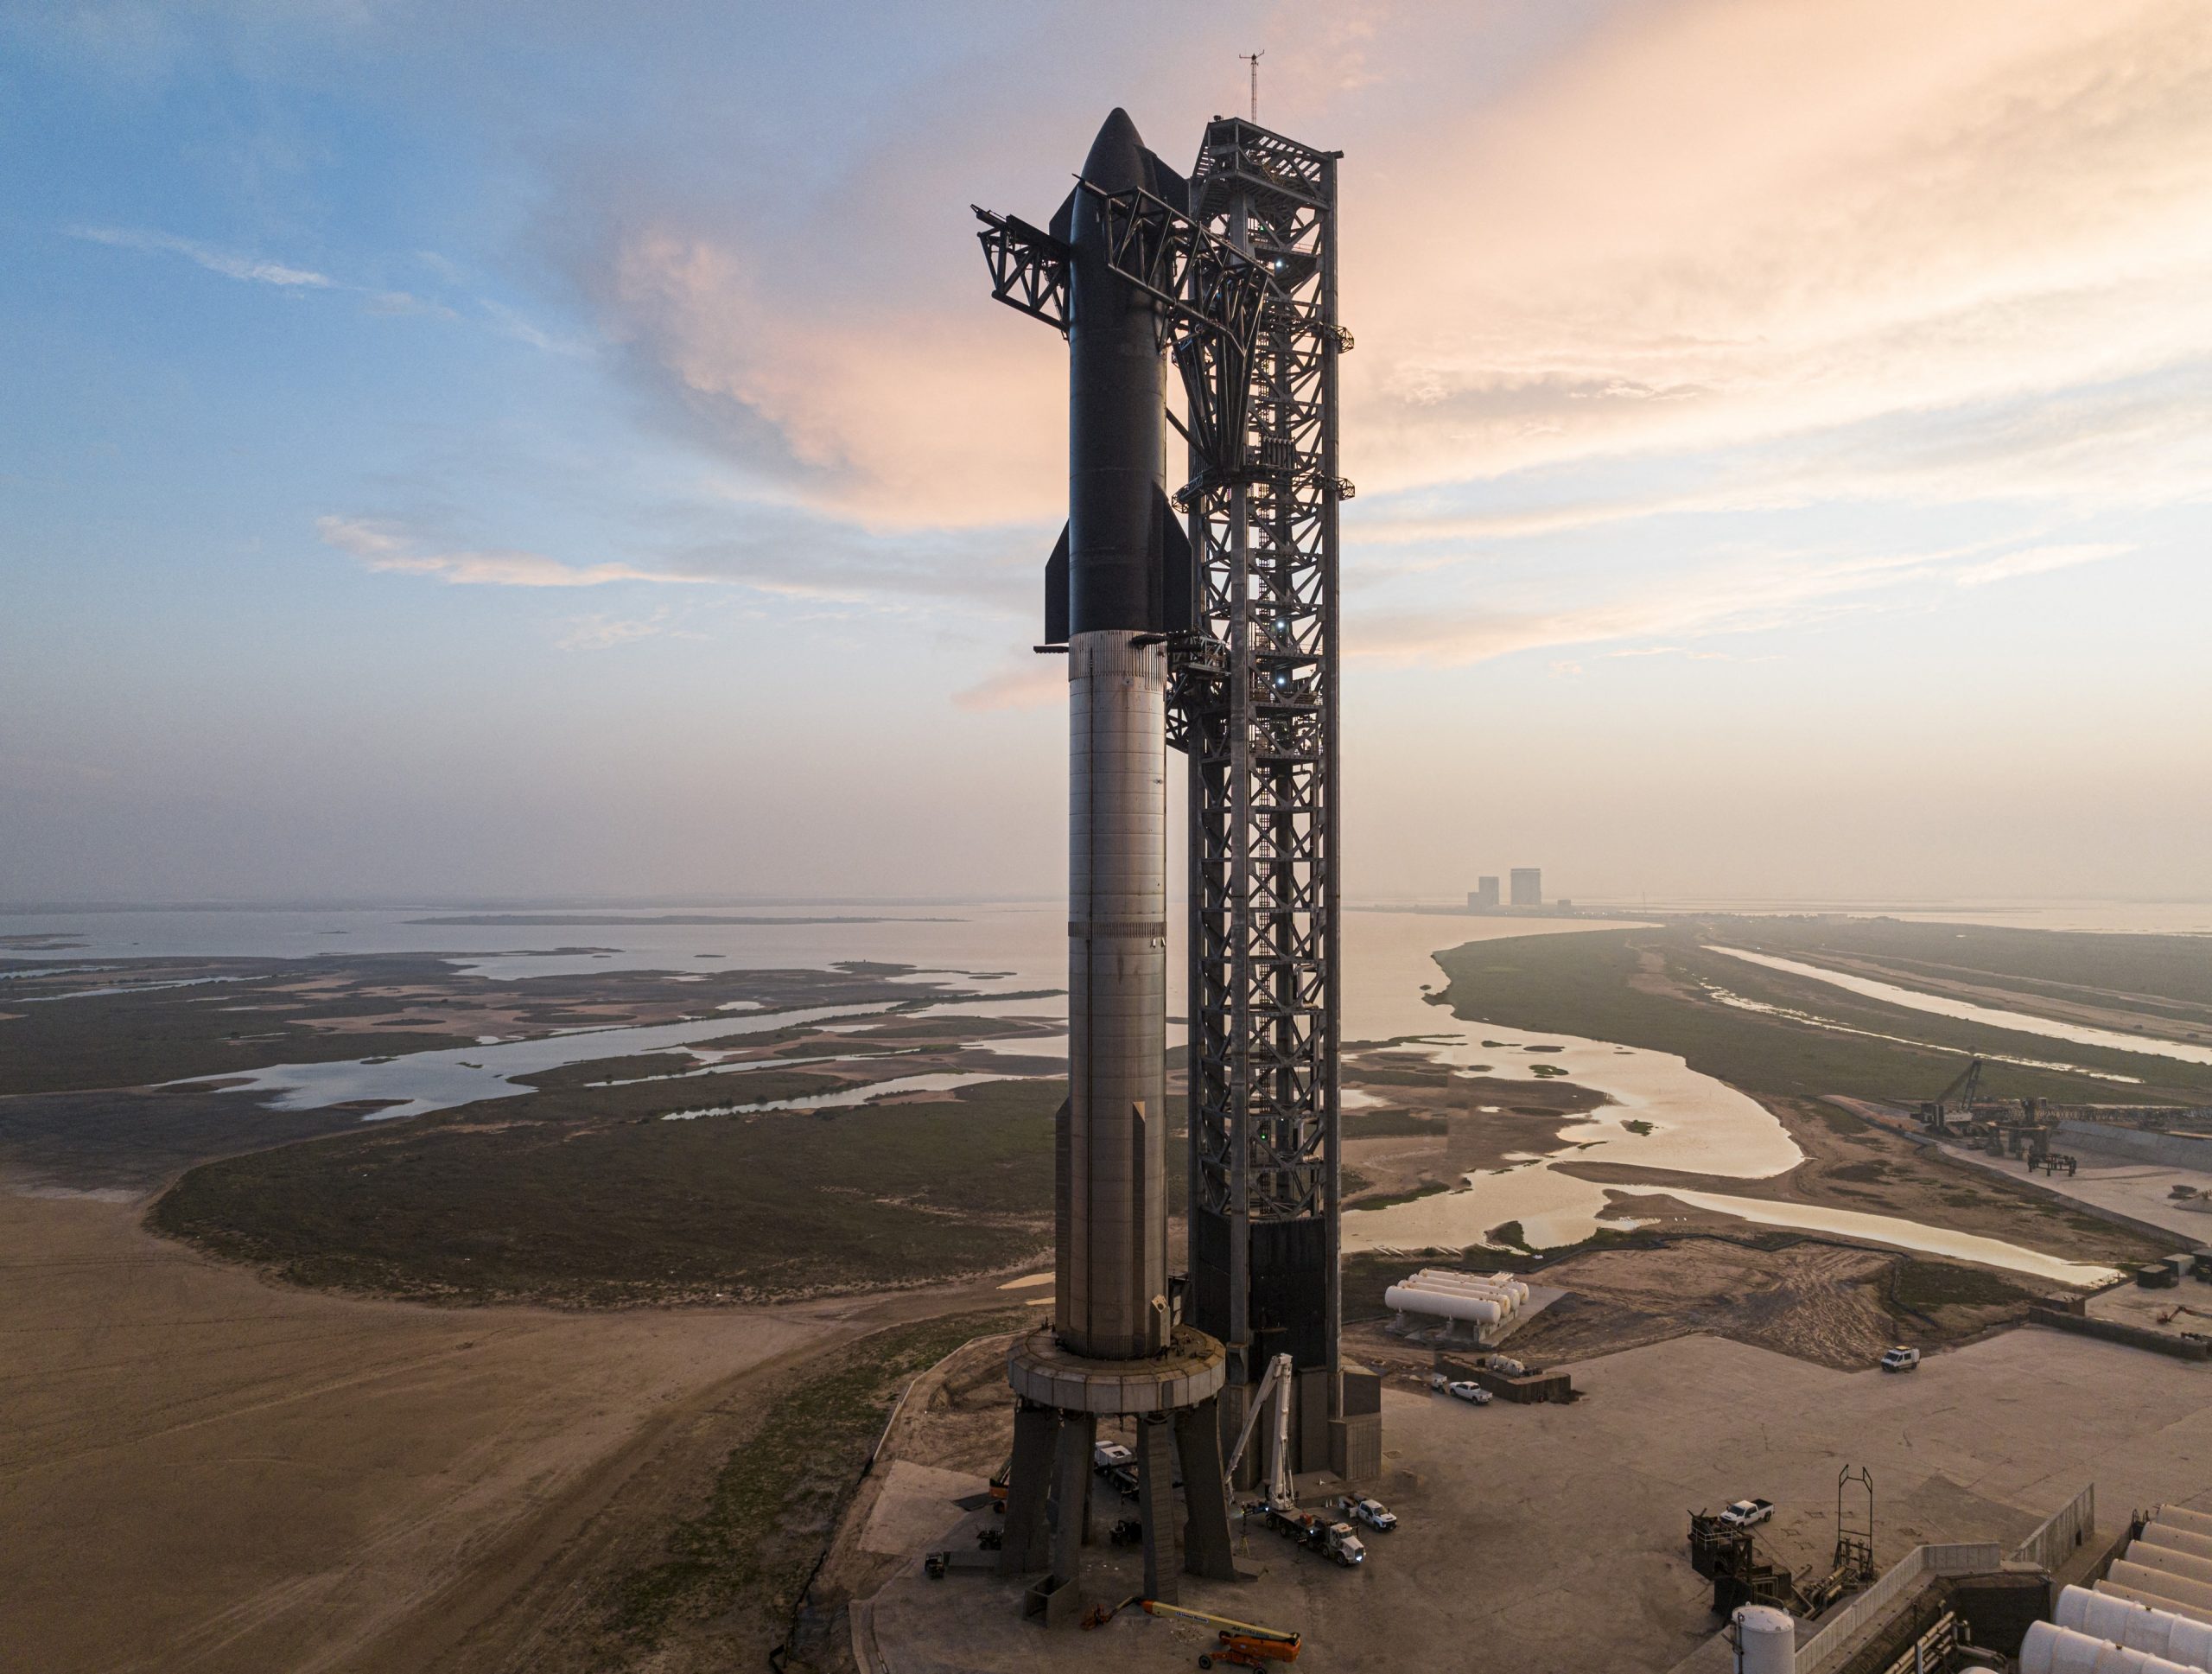 'Space Cowboy' Elon Musk Launches a Rocket Today: Could Space Travel Change Permanently?